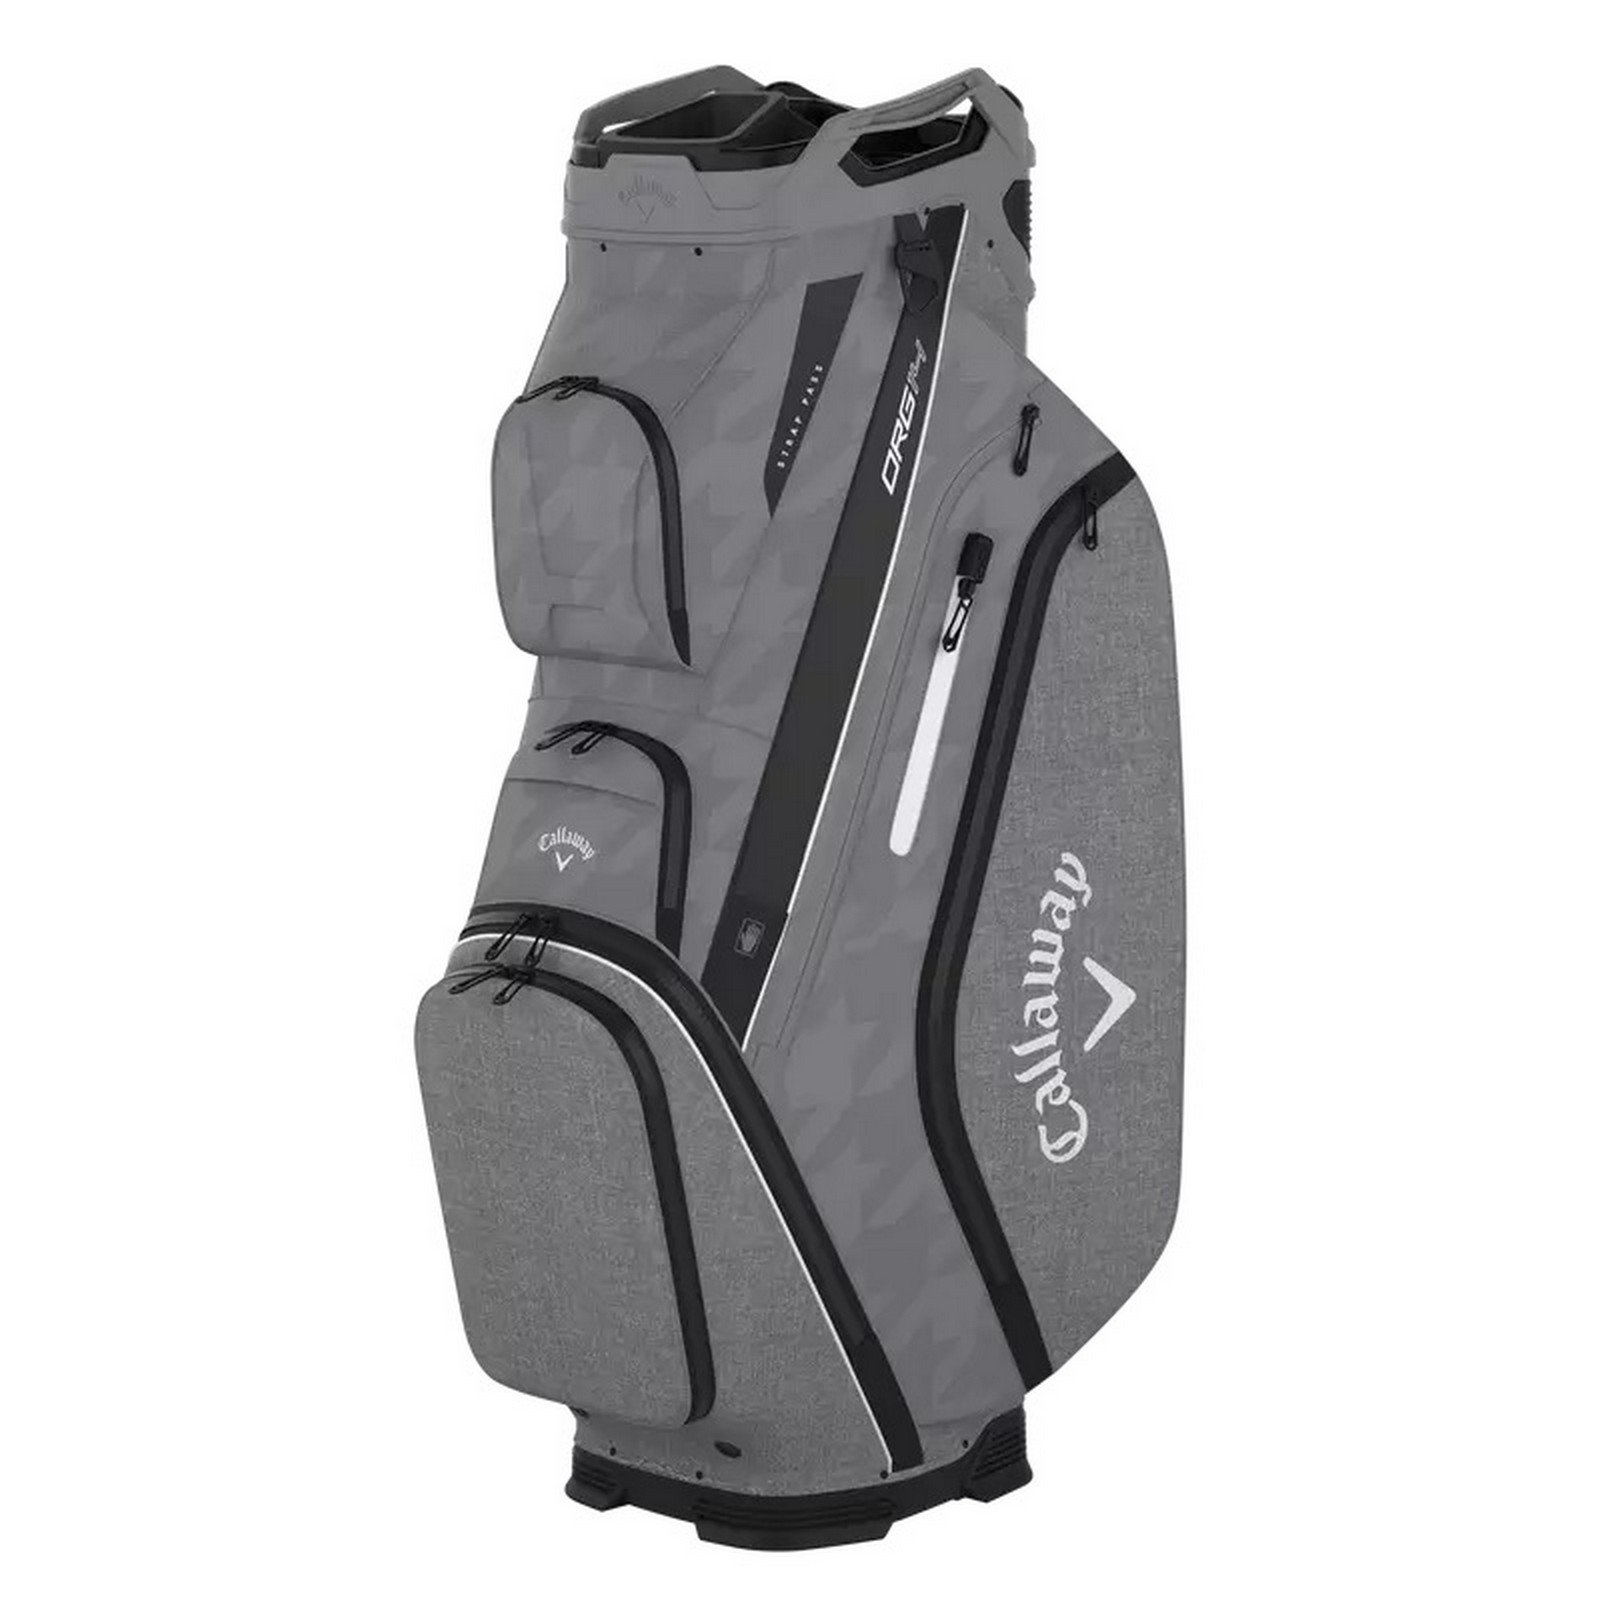 The all-new Callaway ORG 14 takes organization and compatibility toÂ the next level. Upgraded with Lowrider technology, ORG 14Â integrates with most modern push-carts and provides a secure walkÂ with ...